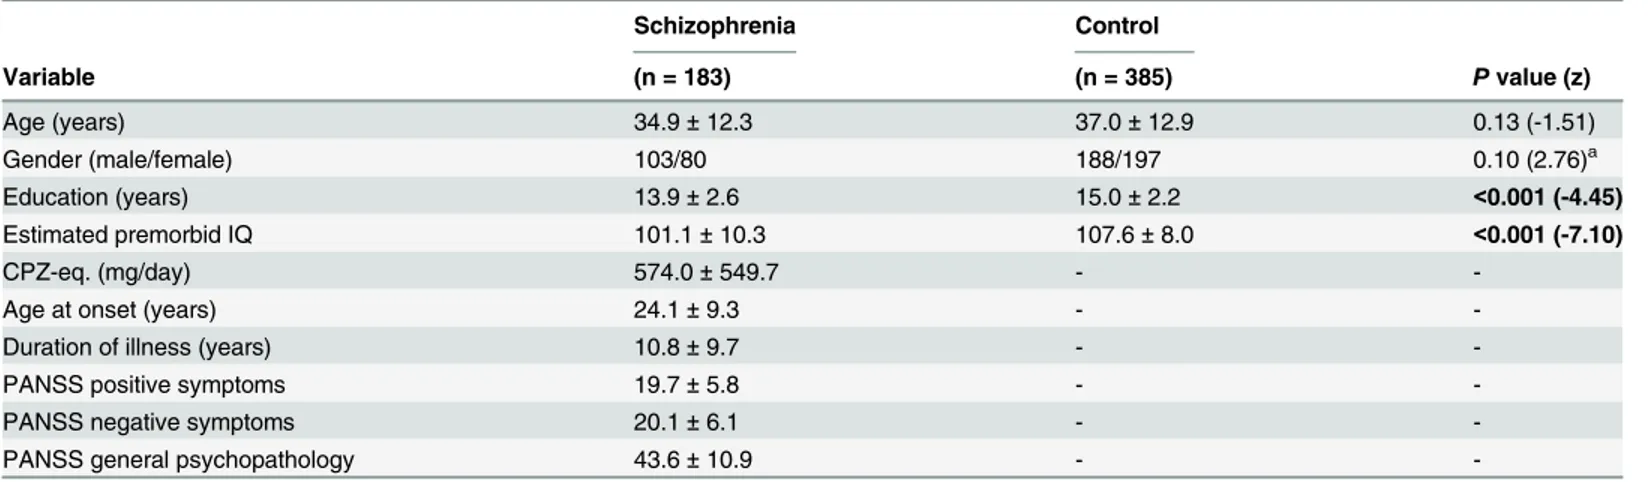 Table 1. Demographic information for patients with schizophrenia and healthy controls.